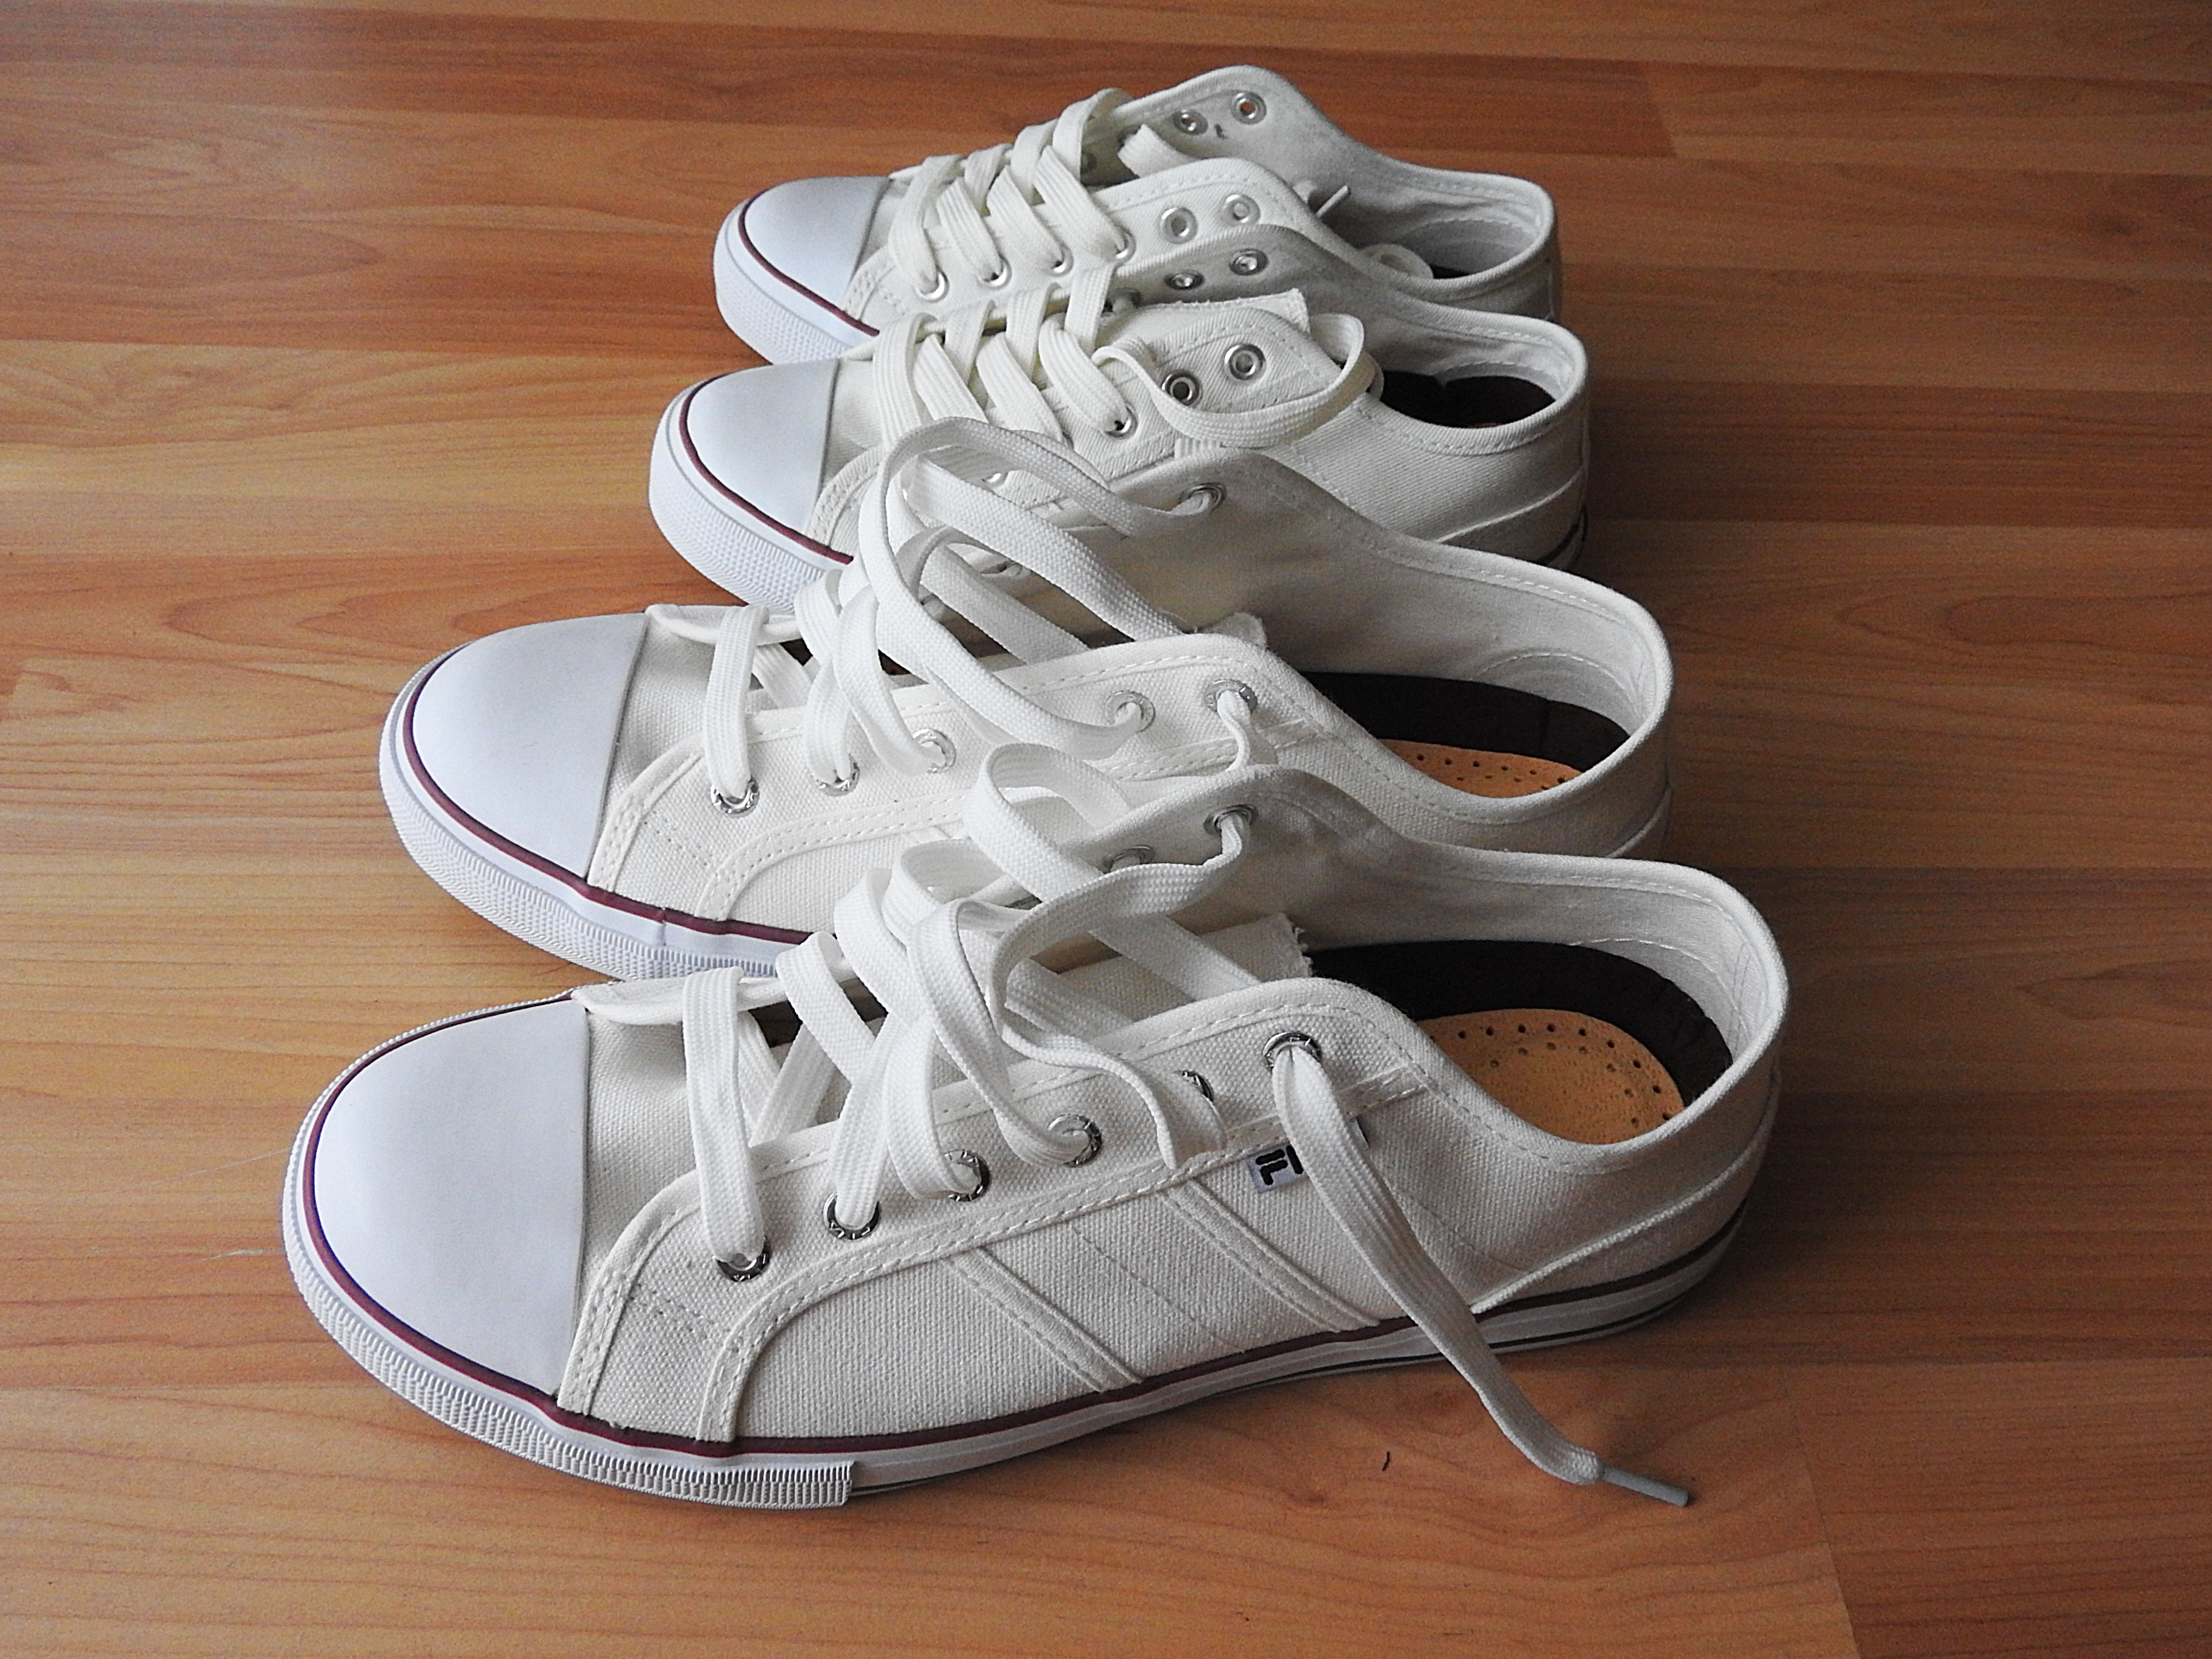 2 pair of white low tops sneakers